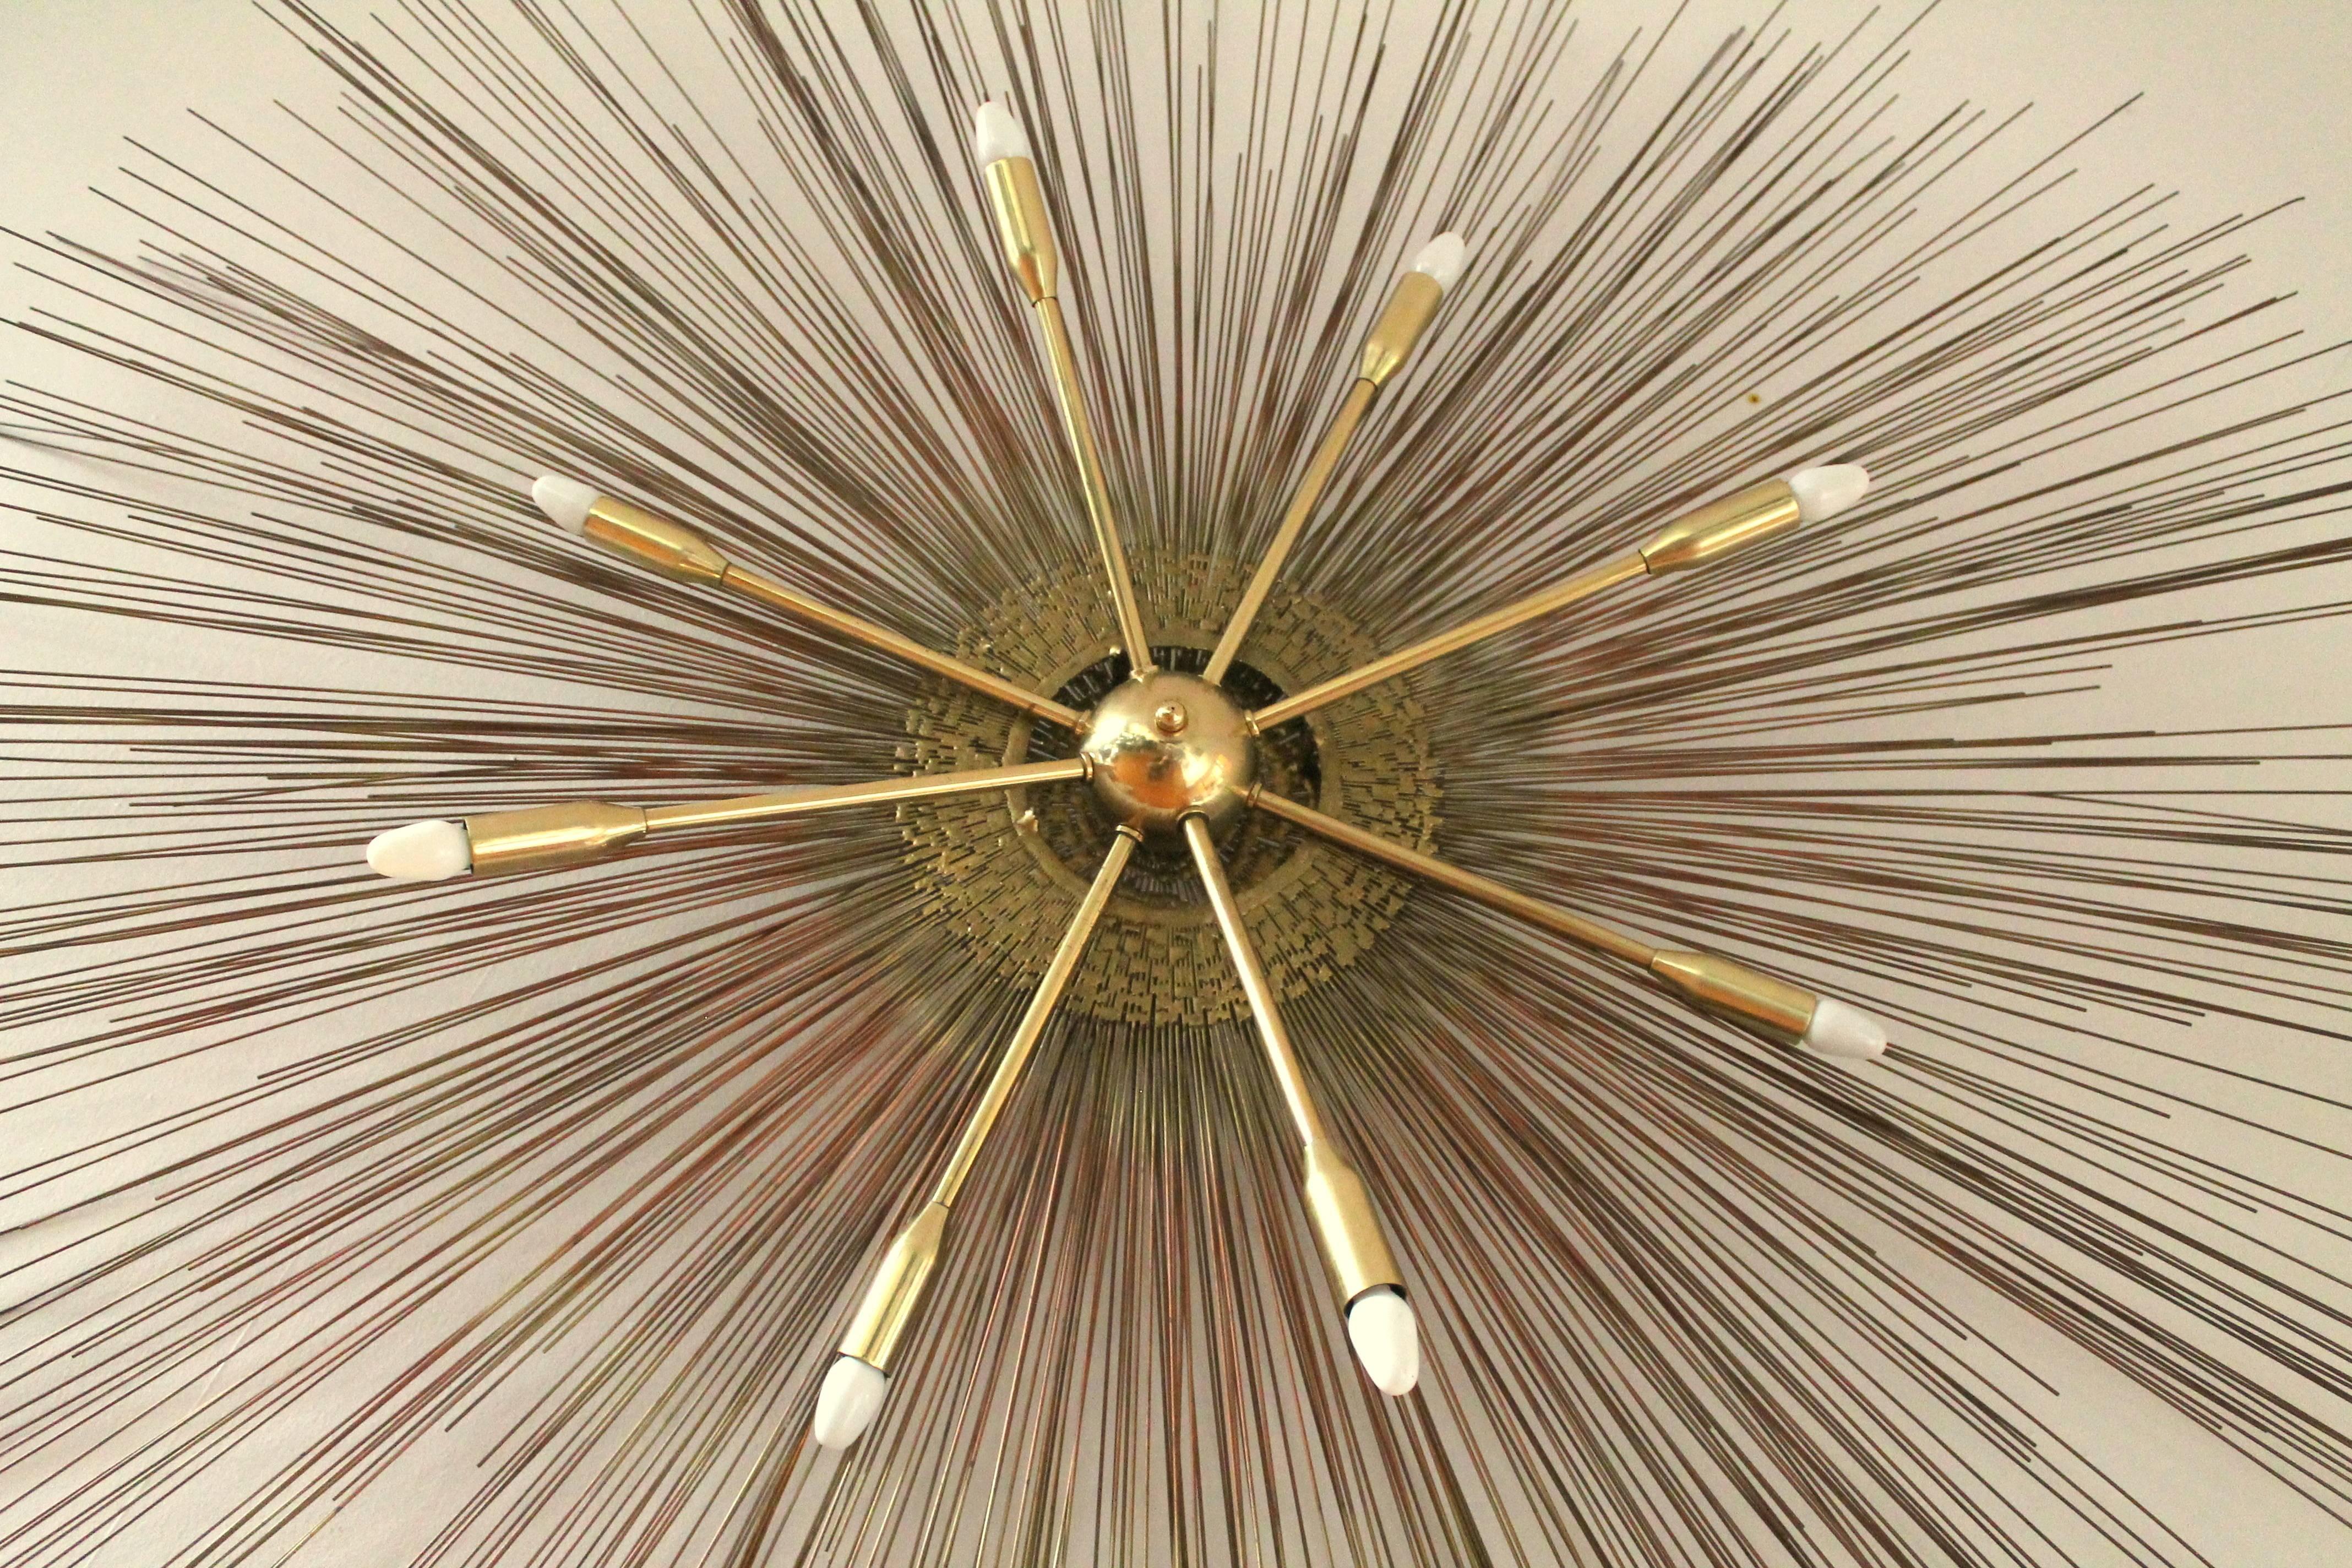 Two-tier wall art combined with an eight arm brass Sputnik measuring 5 foot wide  . 

Steel  rods  with brass welding and accent . 

8  E12 candelabra size socket . 

When lighted, the shadow projected on the wall make the rods appear close to 7